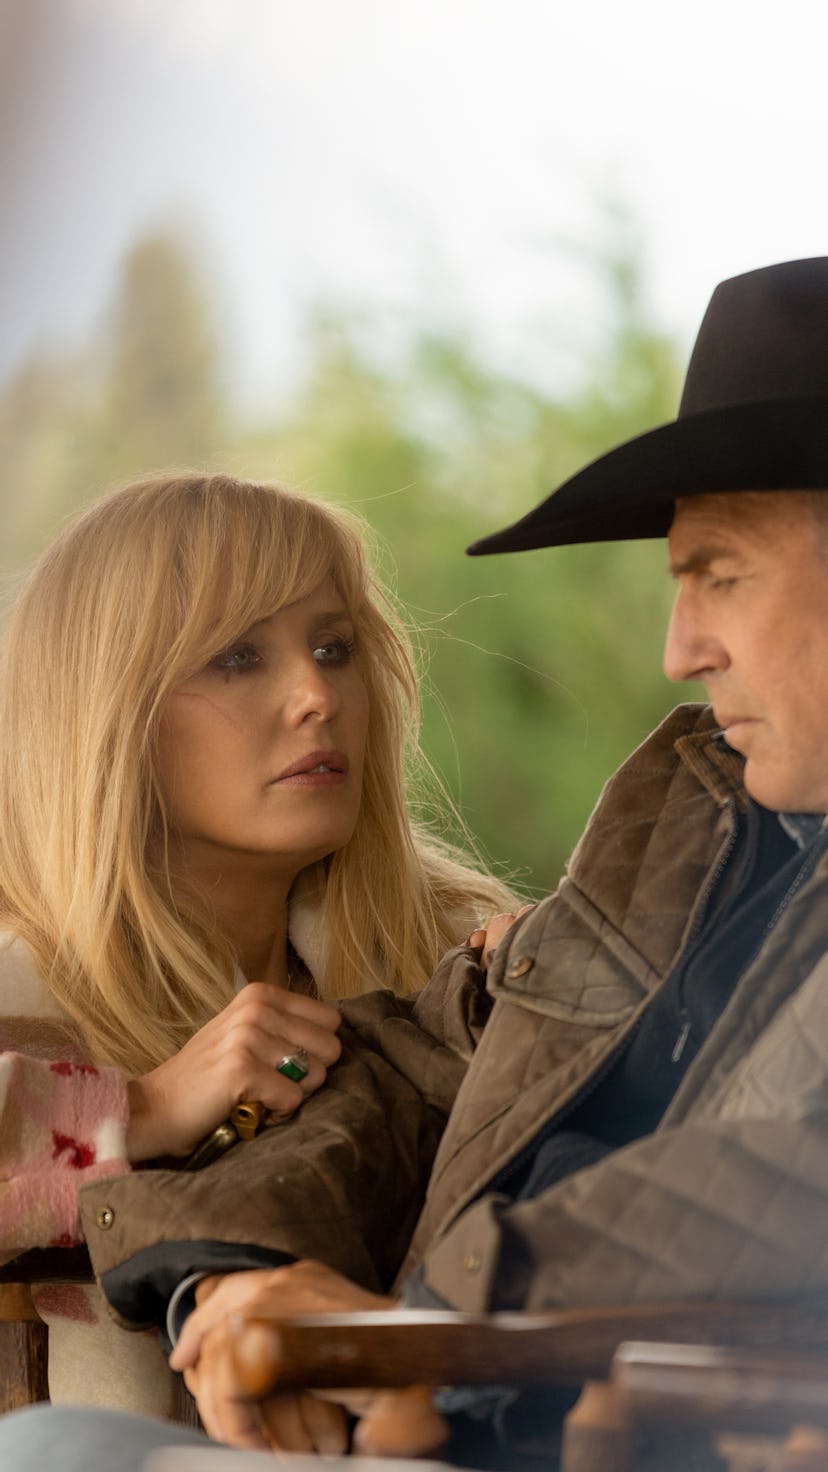 Beth and John Dutton in a scene from 'Yellowstone' on Paramount+.